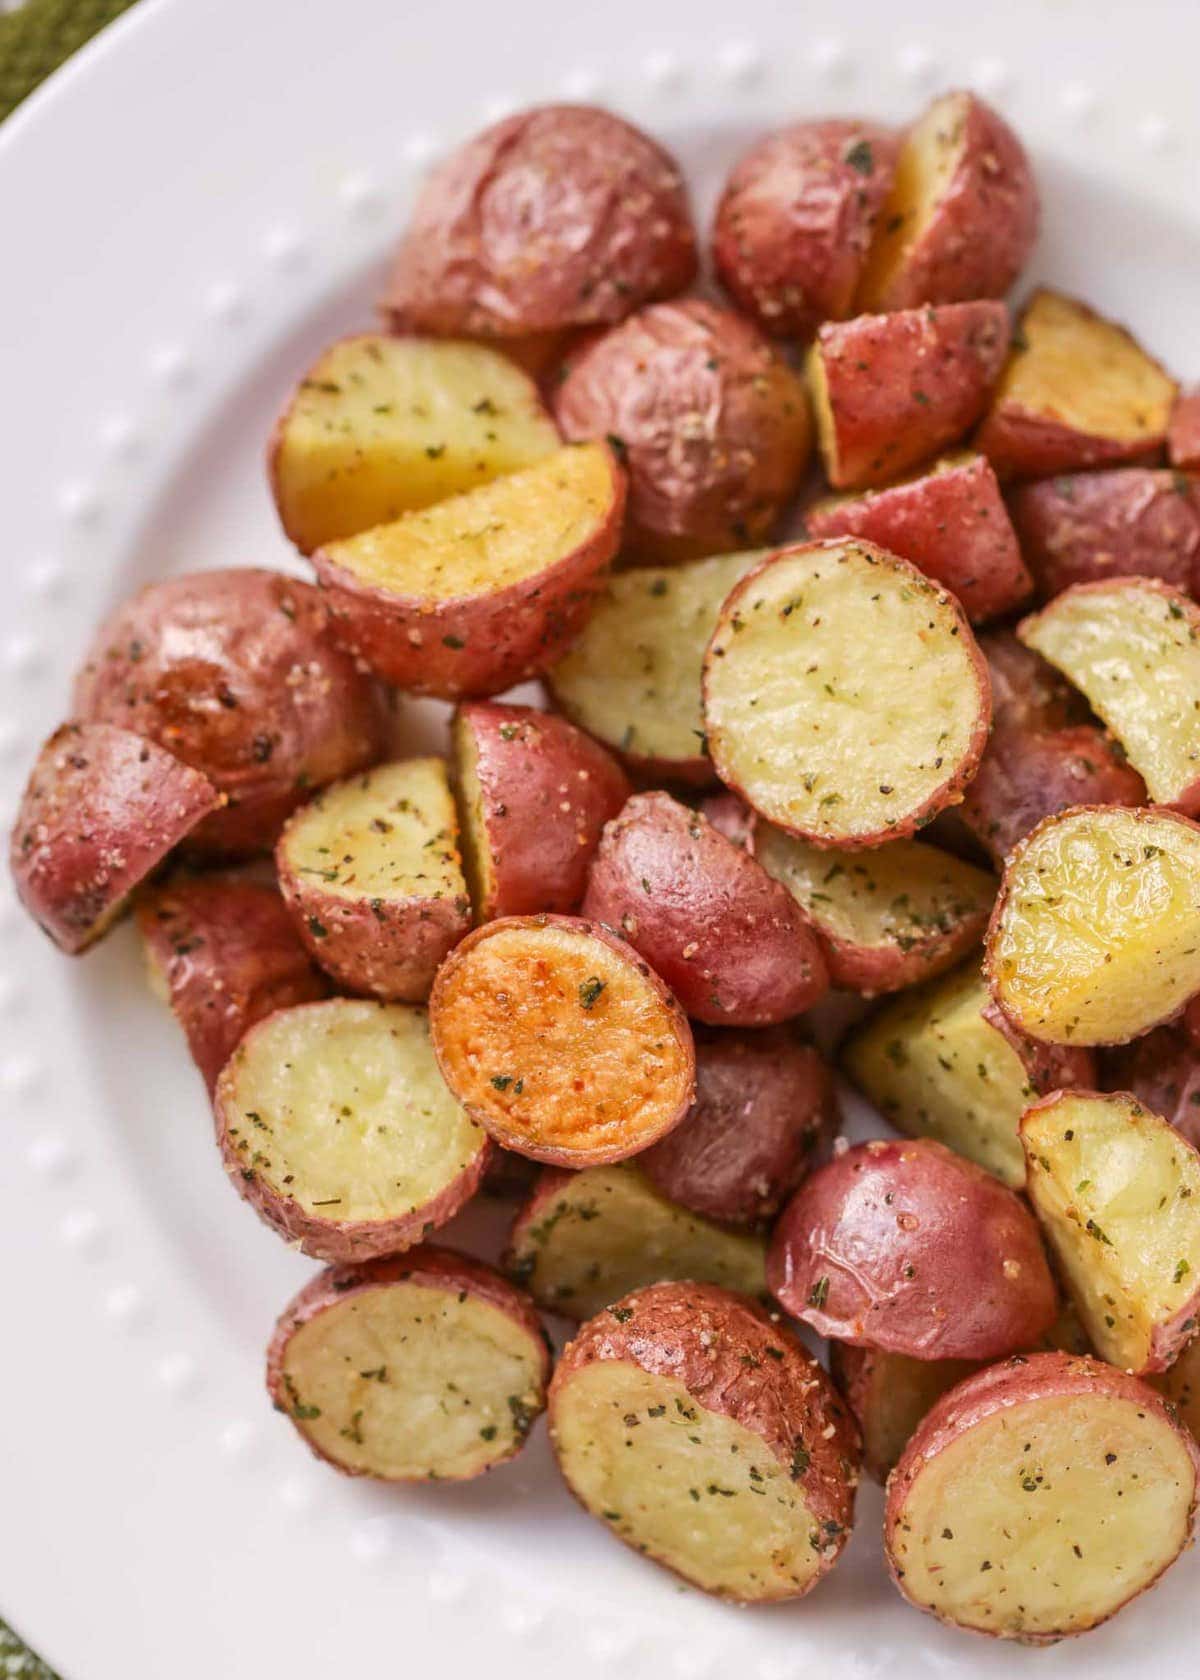 Roasted Red Potatoes Recipe on dish